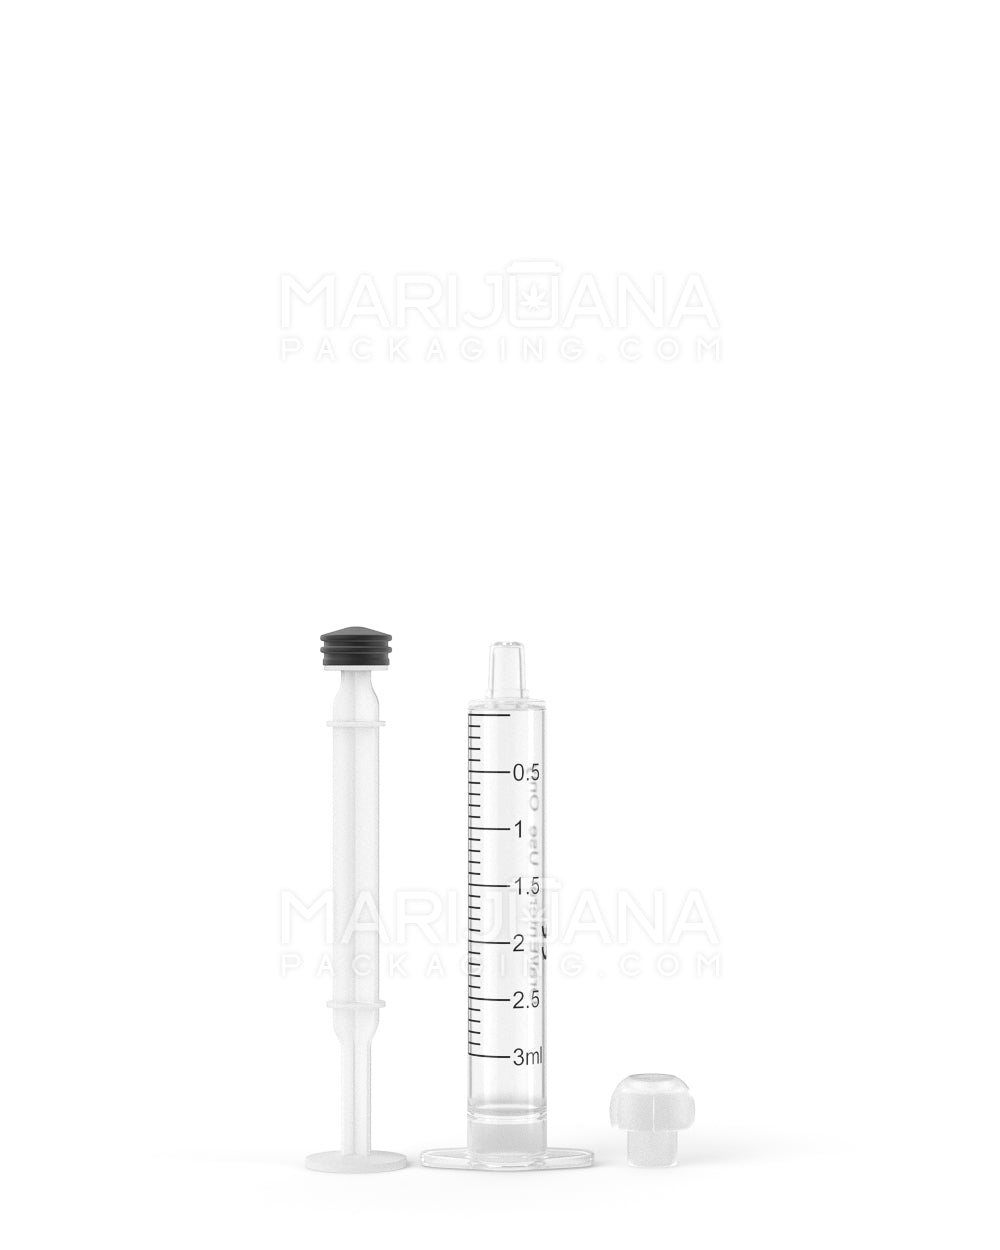 Plastic Oral Concentrate Syringes | 3mL - 0.5mL Increments | Sample - 3